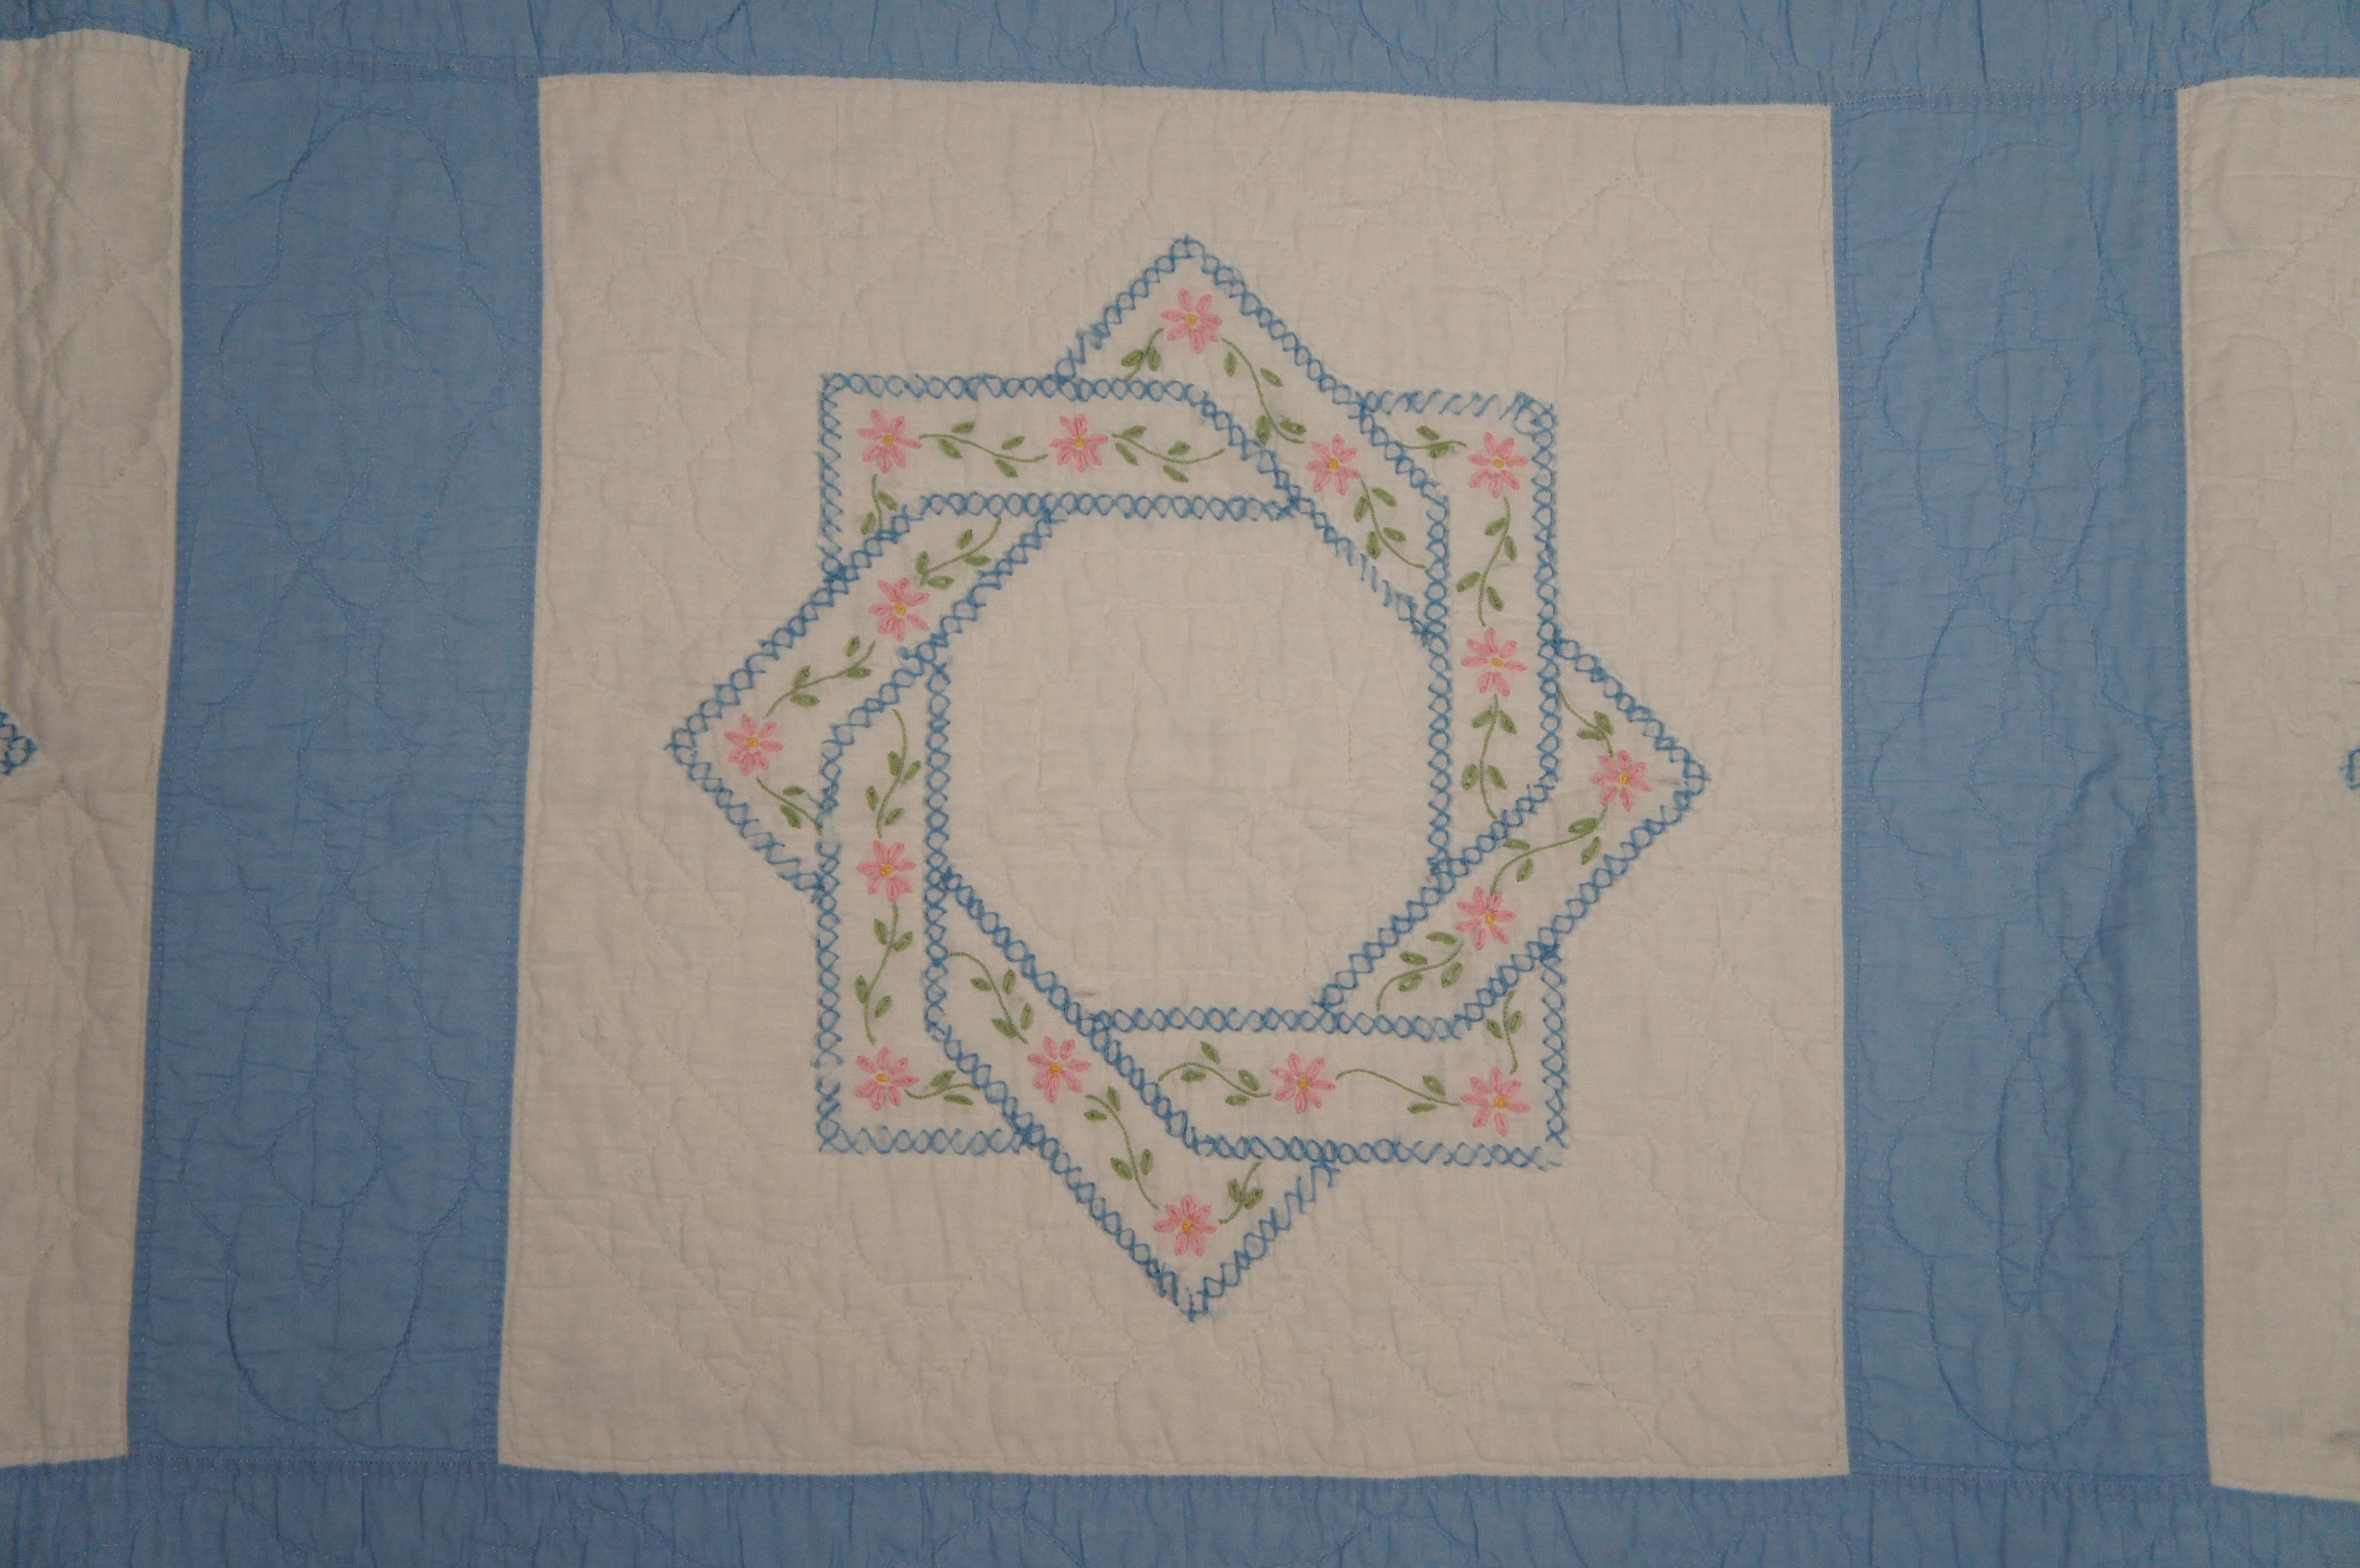 Antique Folk Art Stitched Woven Floral Labyrinth Star Sawtooth Quilt Blanket In Good Condition For Sale In Dayton, OH